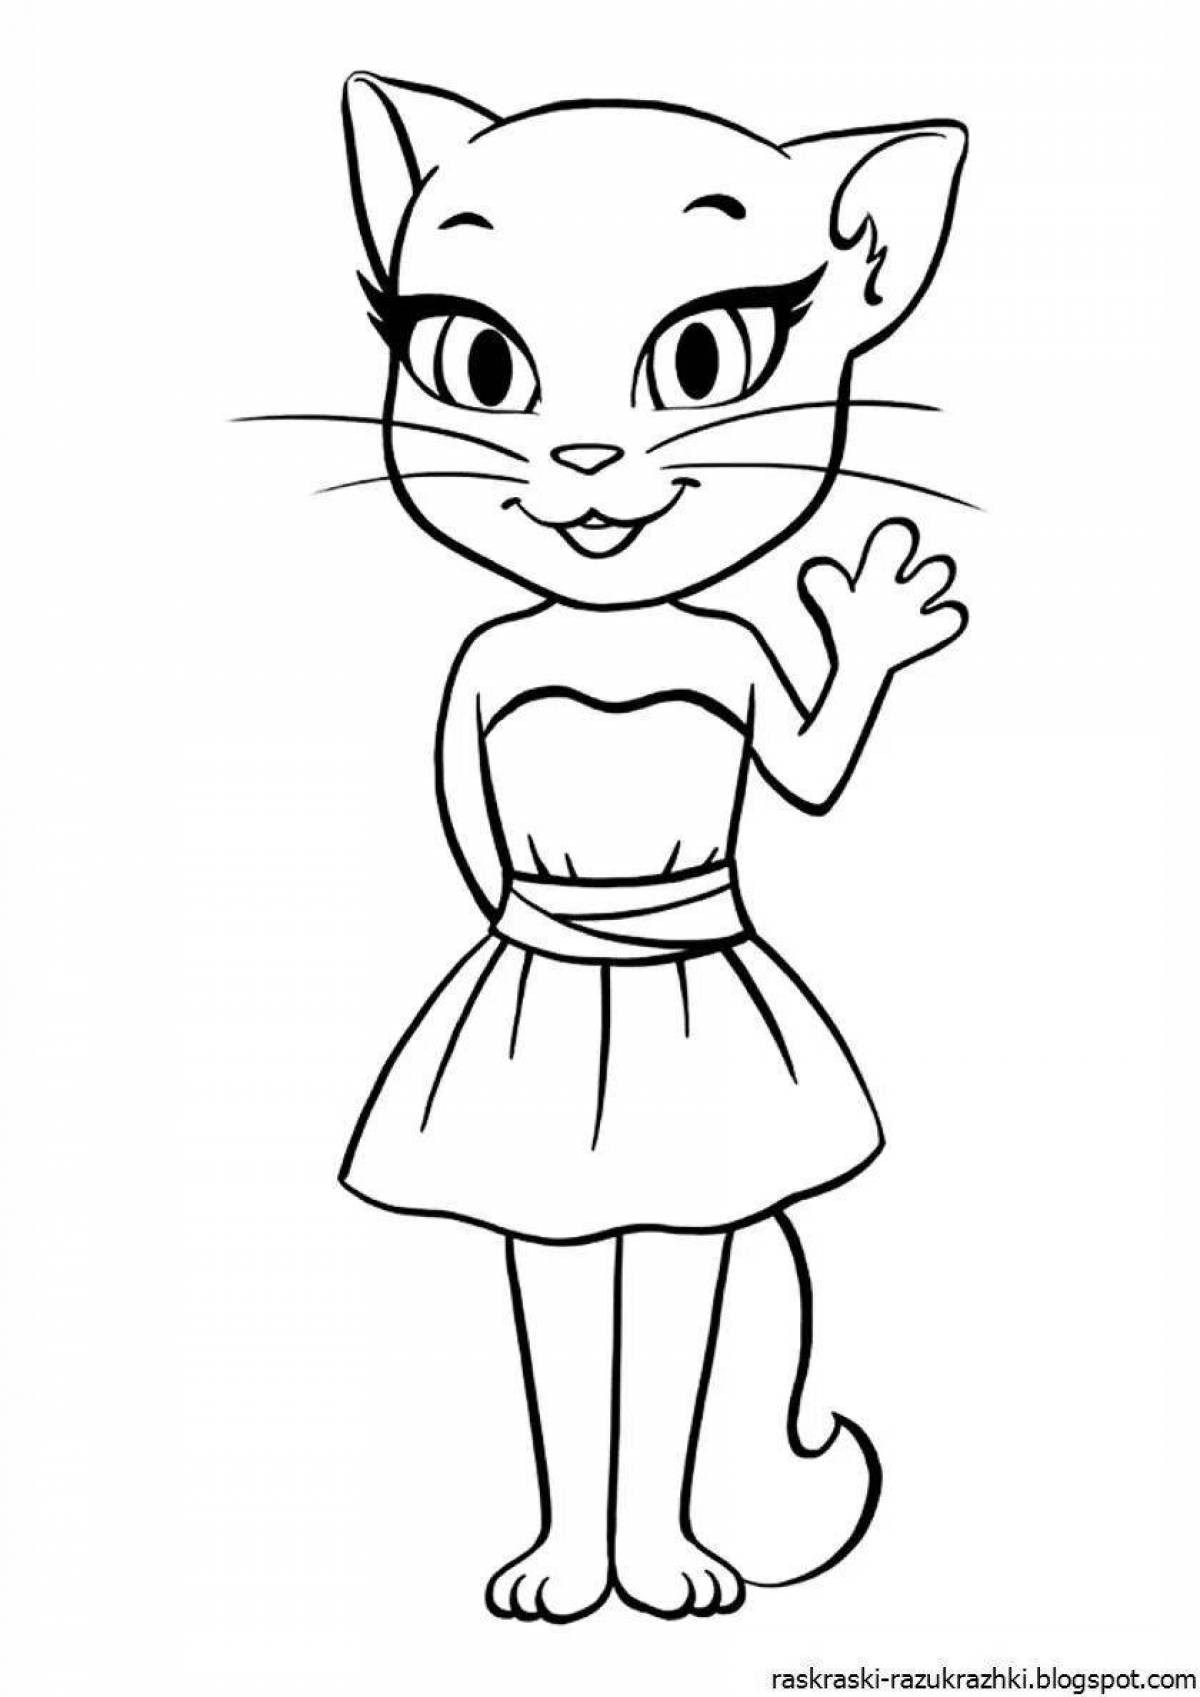 Coloring book brave cat angela